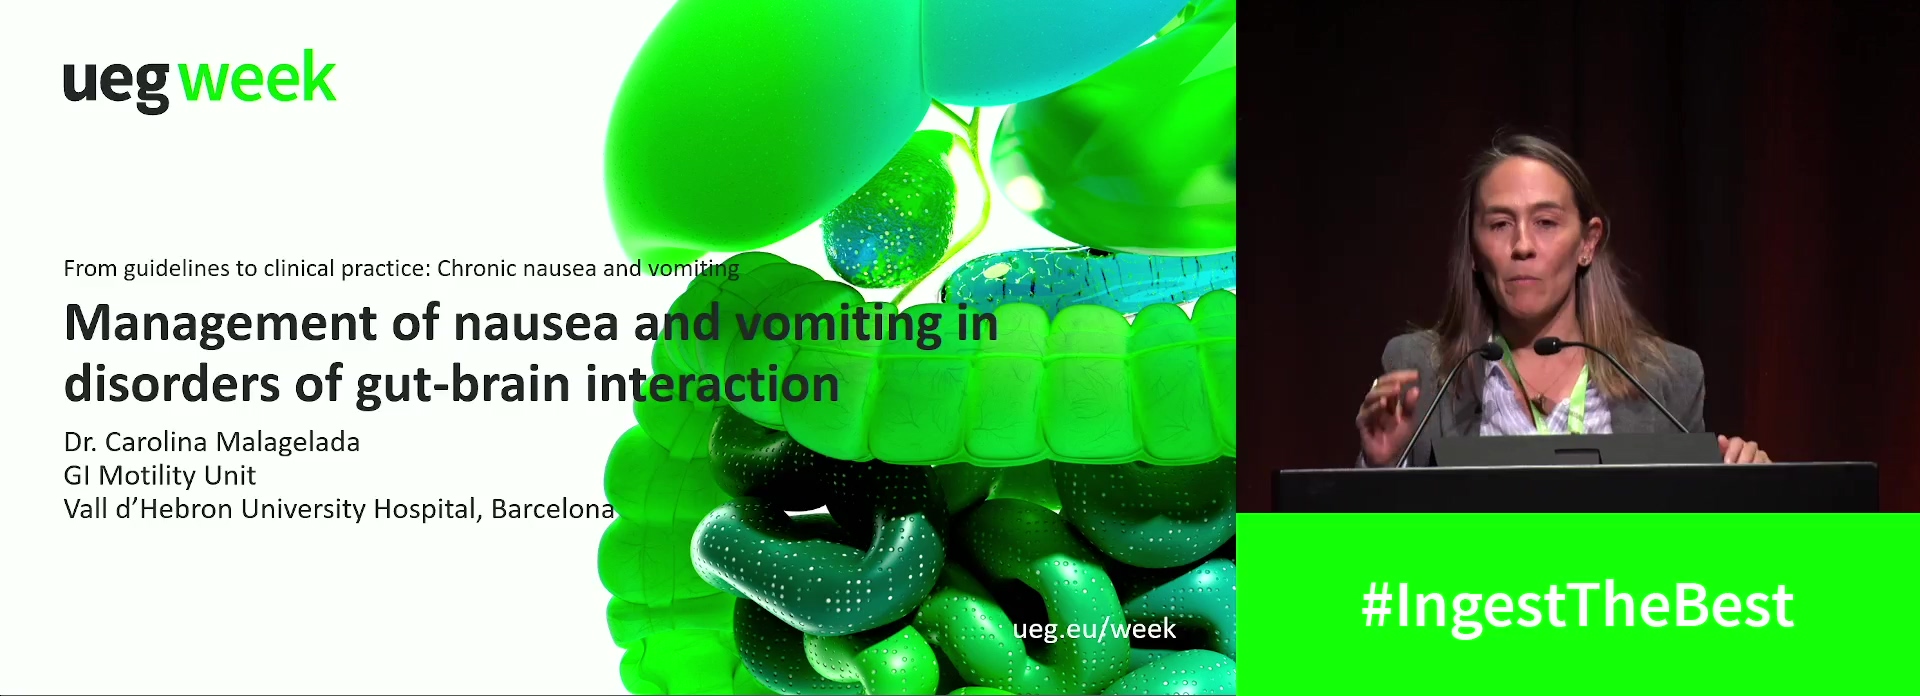 Management of nausea and vomiting in disorders of brain-gut interaction